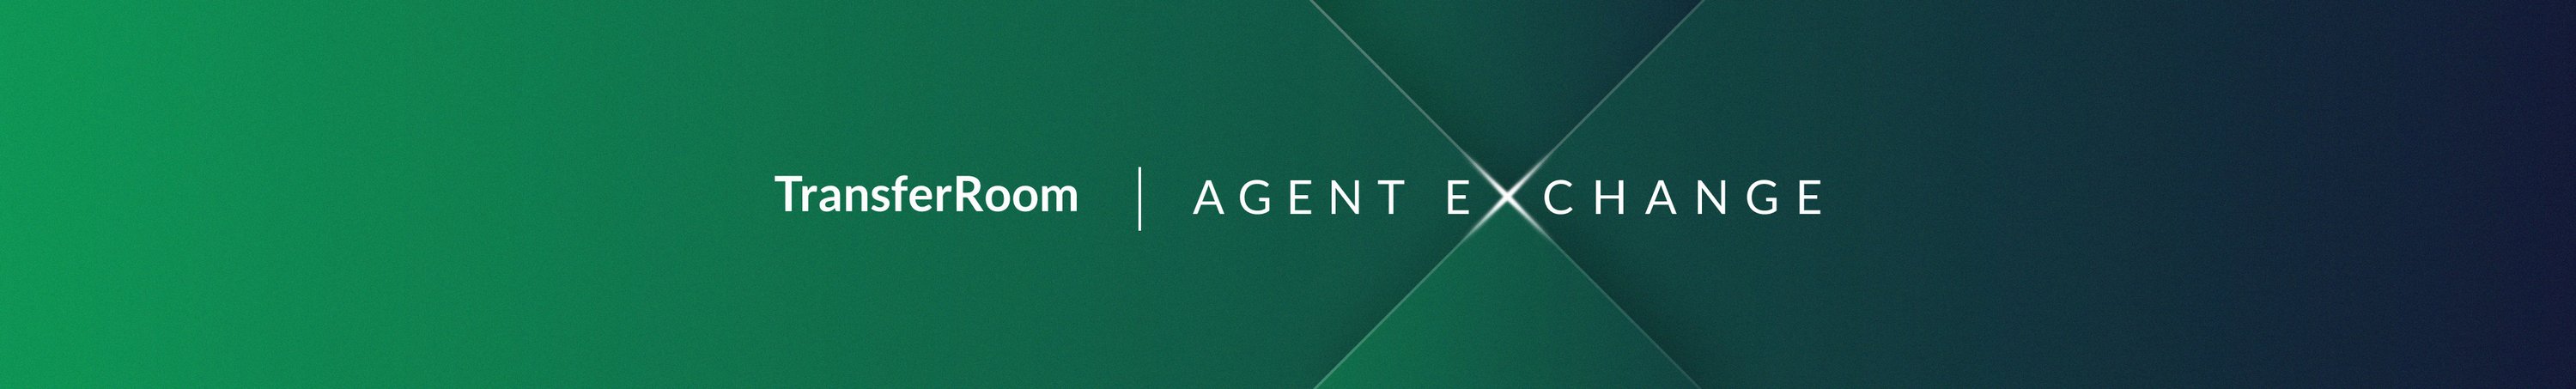 Agent Exchange - Landing Page Banner